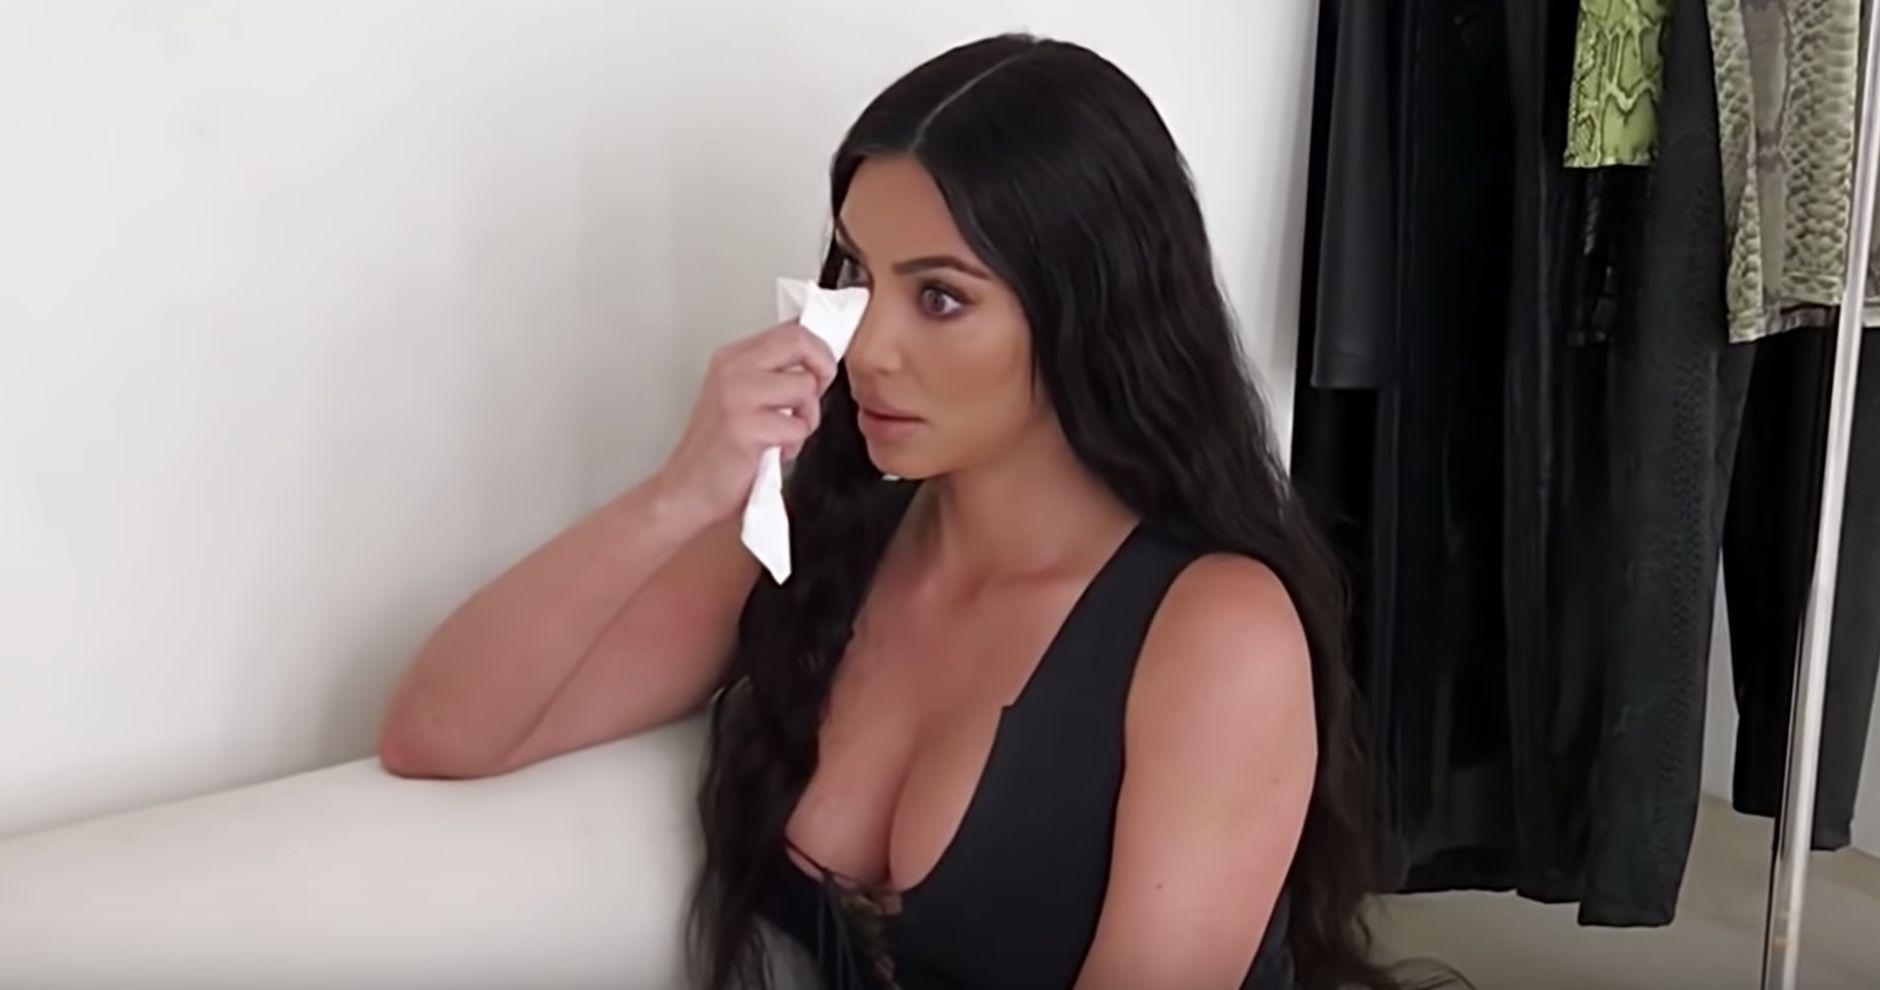 Kim Kardashian tested positive for lupus. What exactly is that?